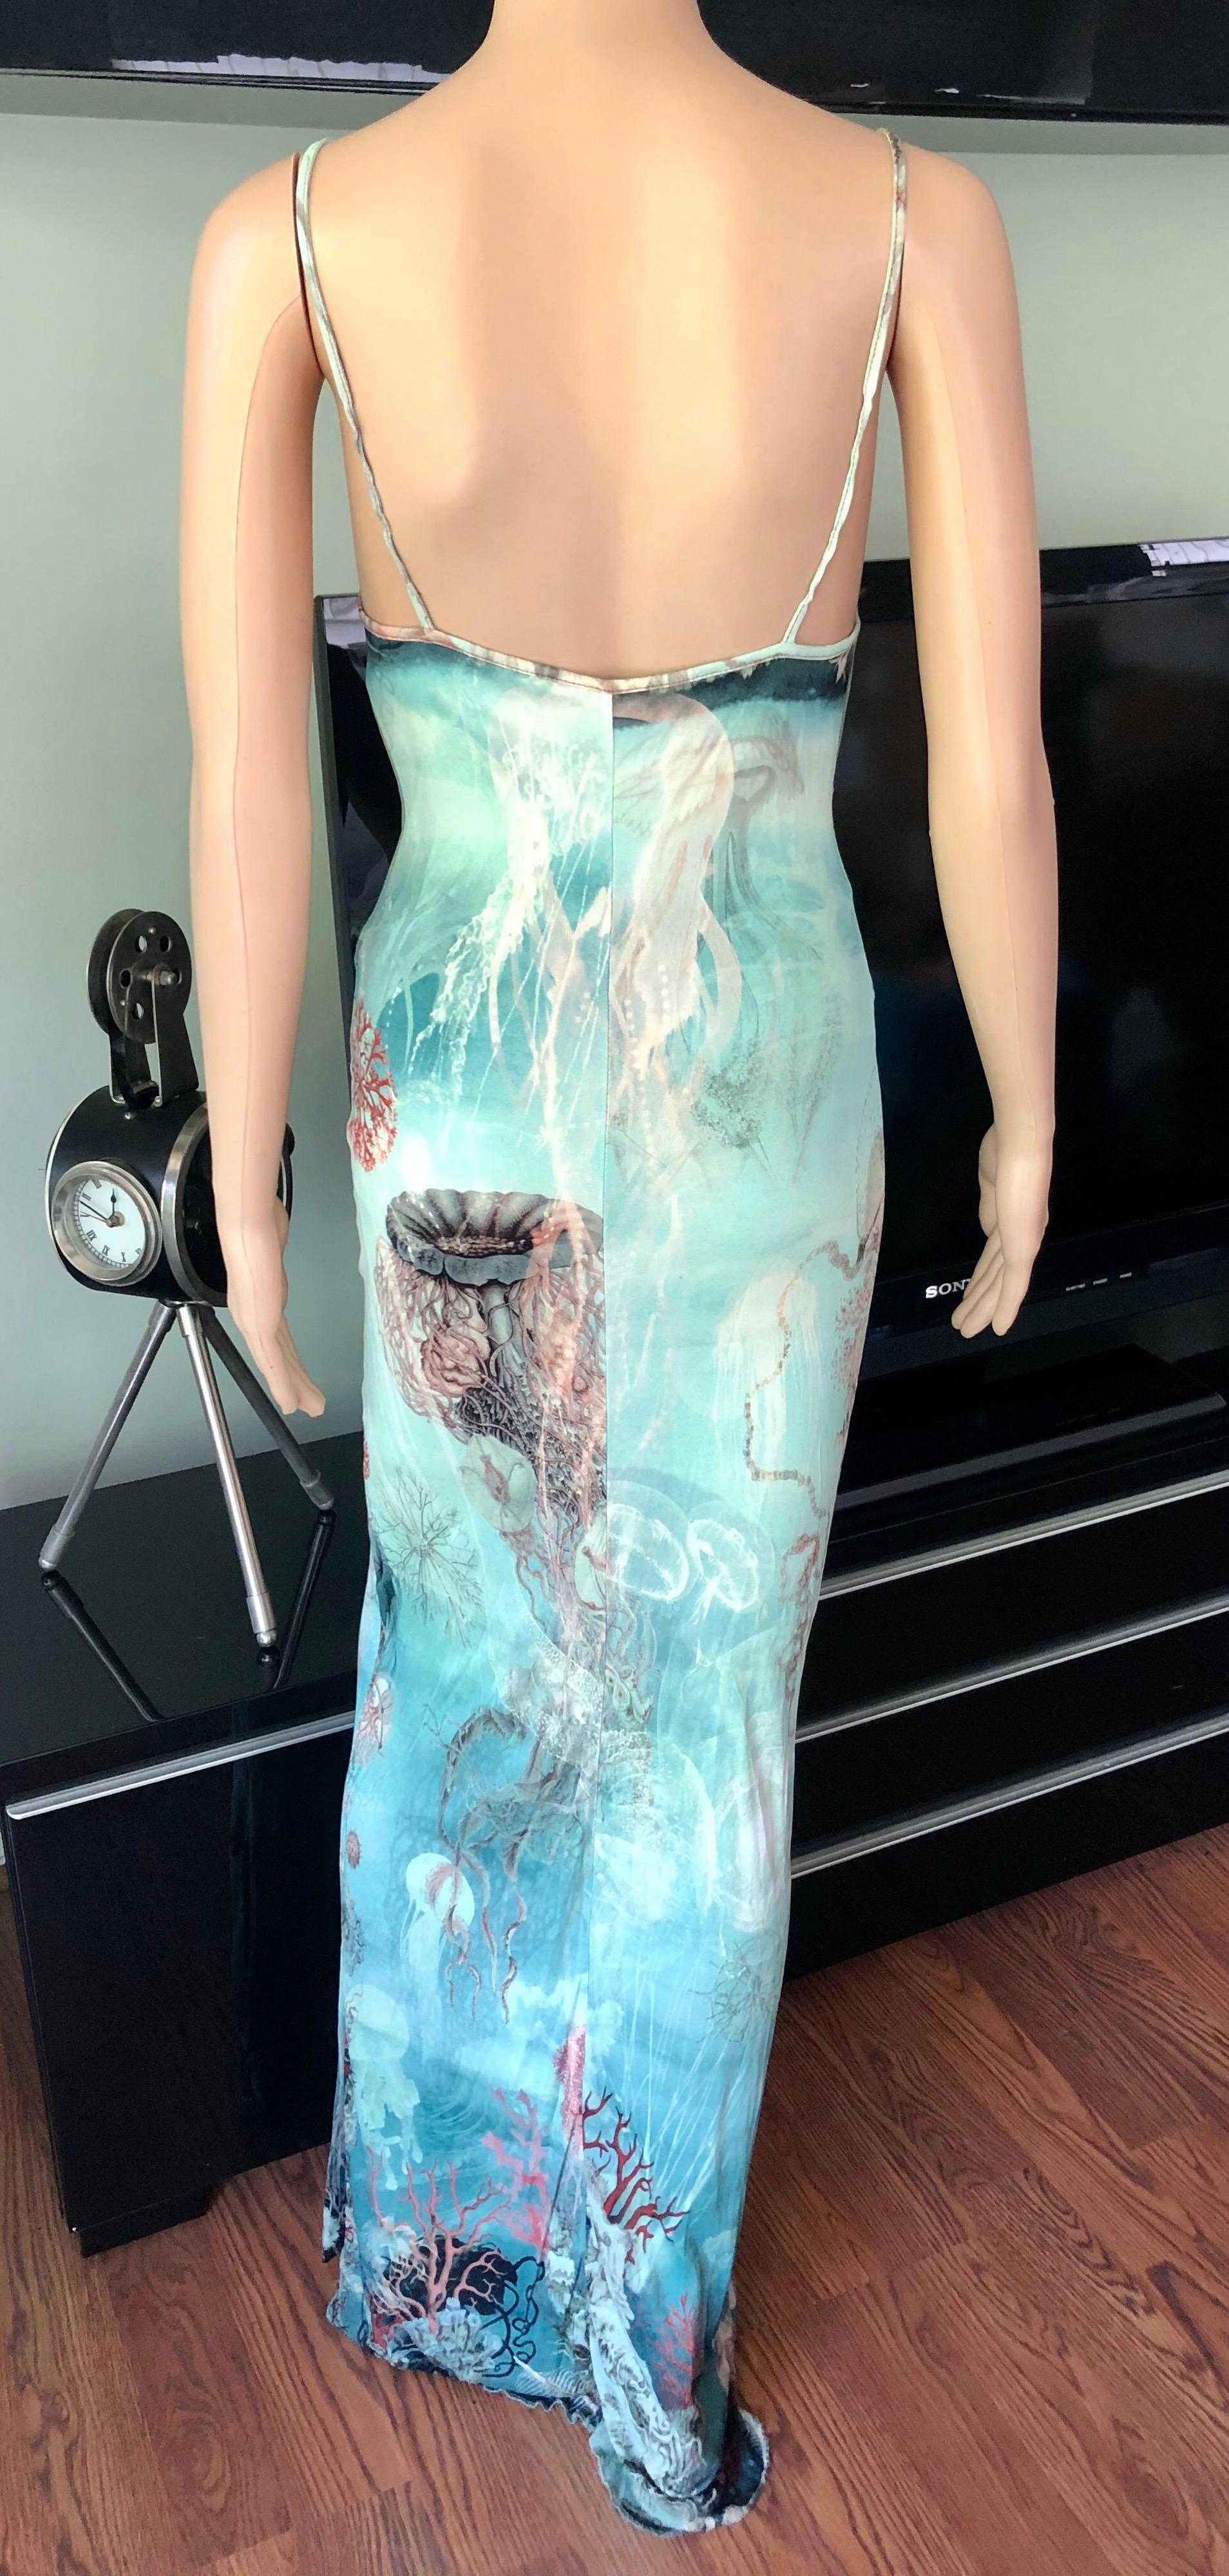 Jean Paul Gaultier S/S 2008 Cutout Sheer Mesh Panels Bodycon Dress In Good Condition For Sale In Naples, FL